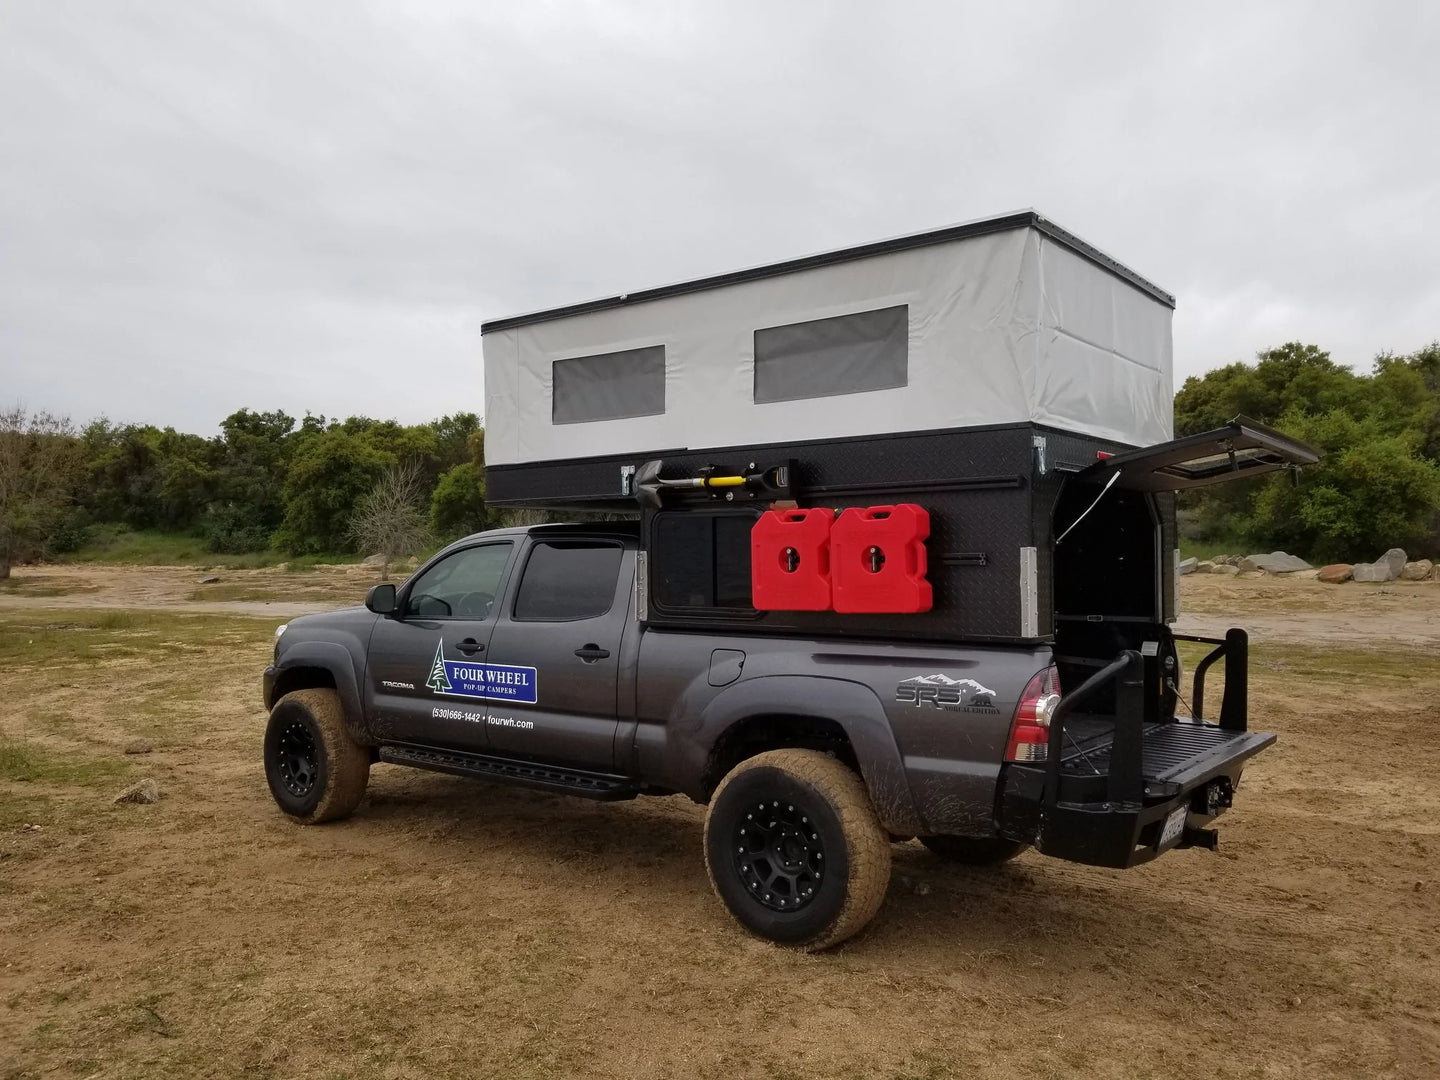 Coming in November: Mid Size Project M Four Wheel Camper